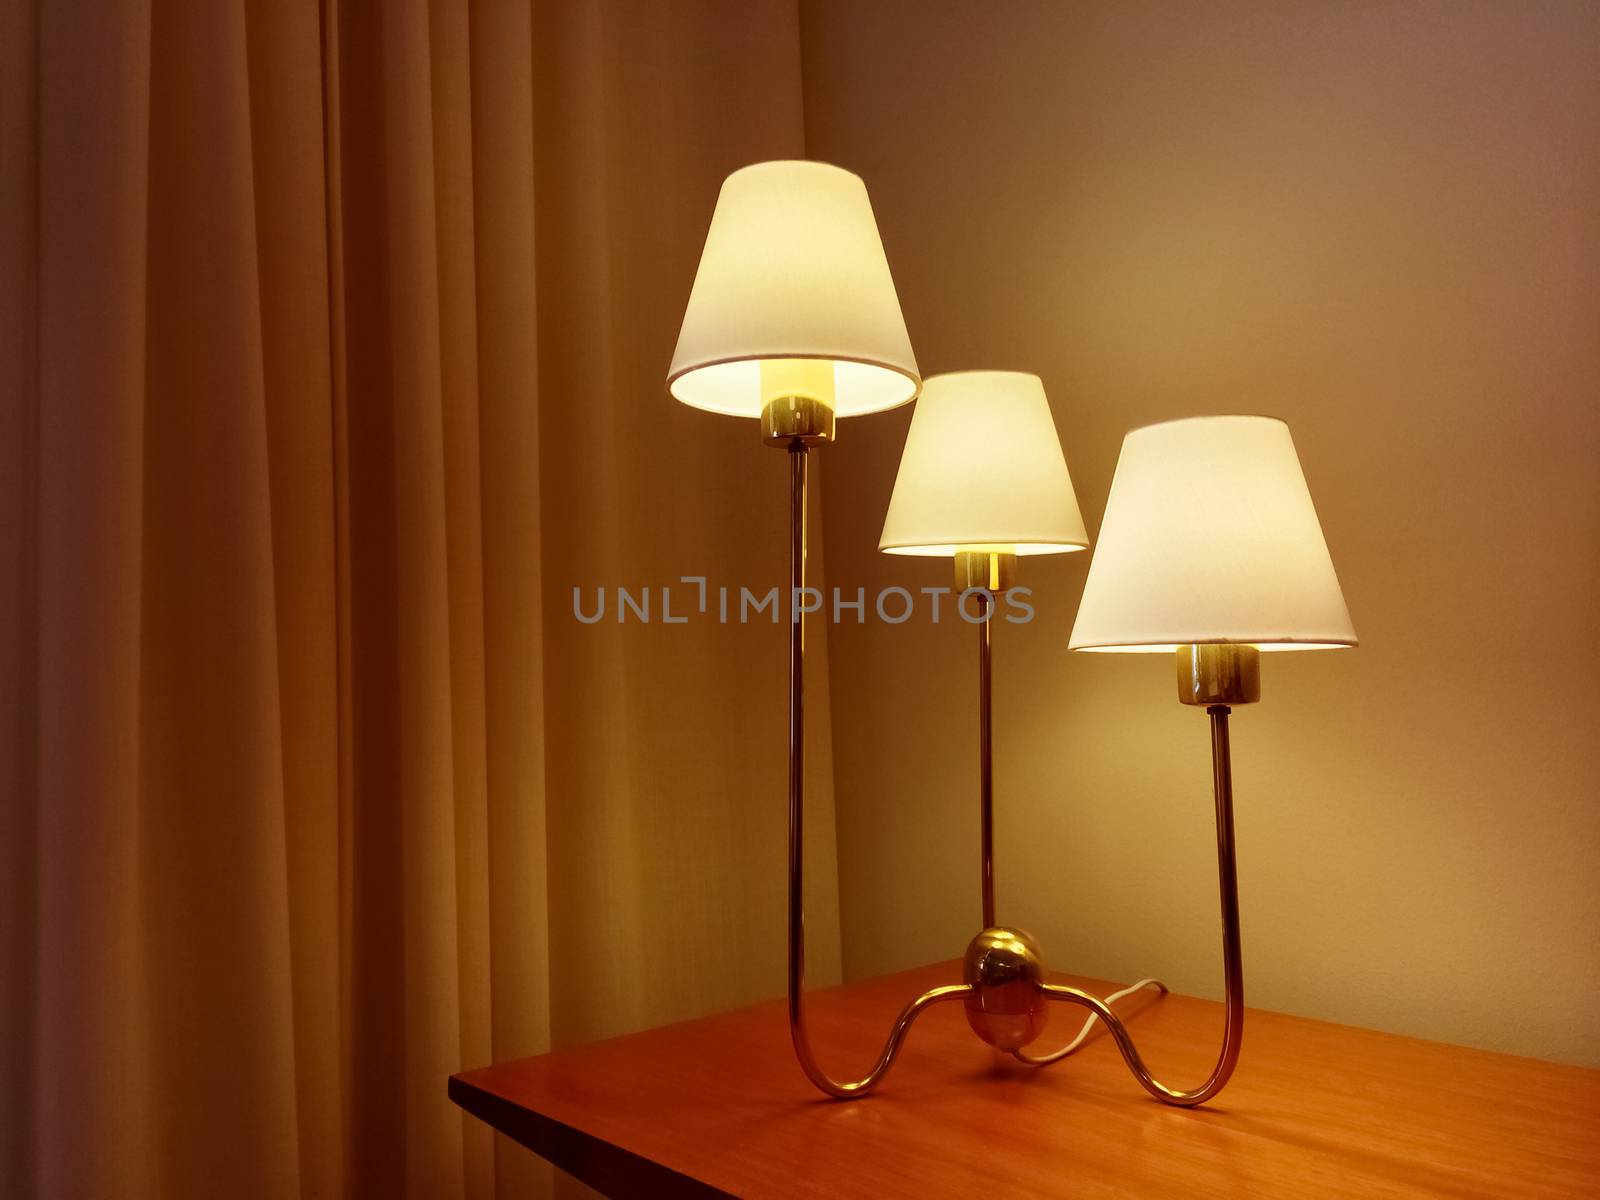 Classic style table lamp decorating a room by anikasalsera